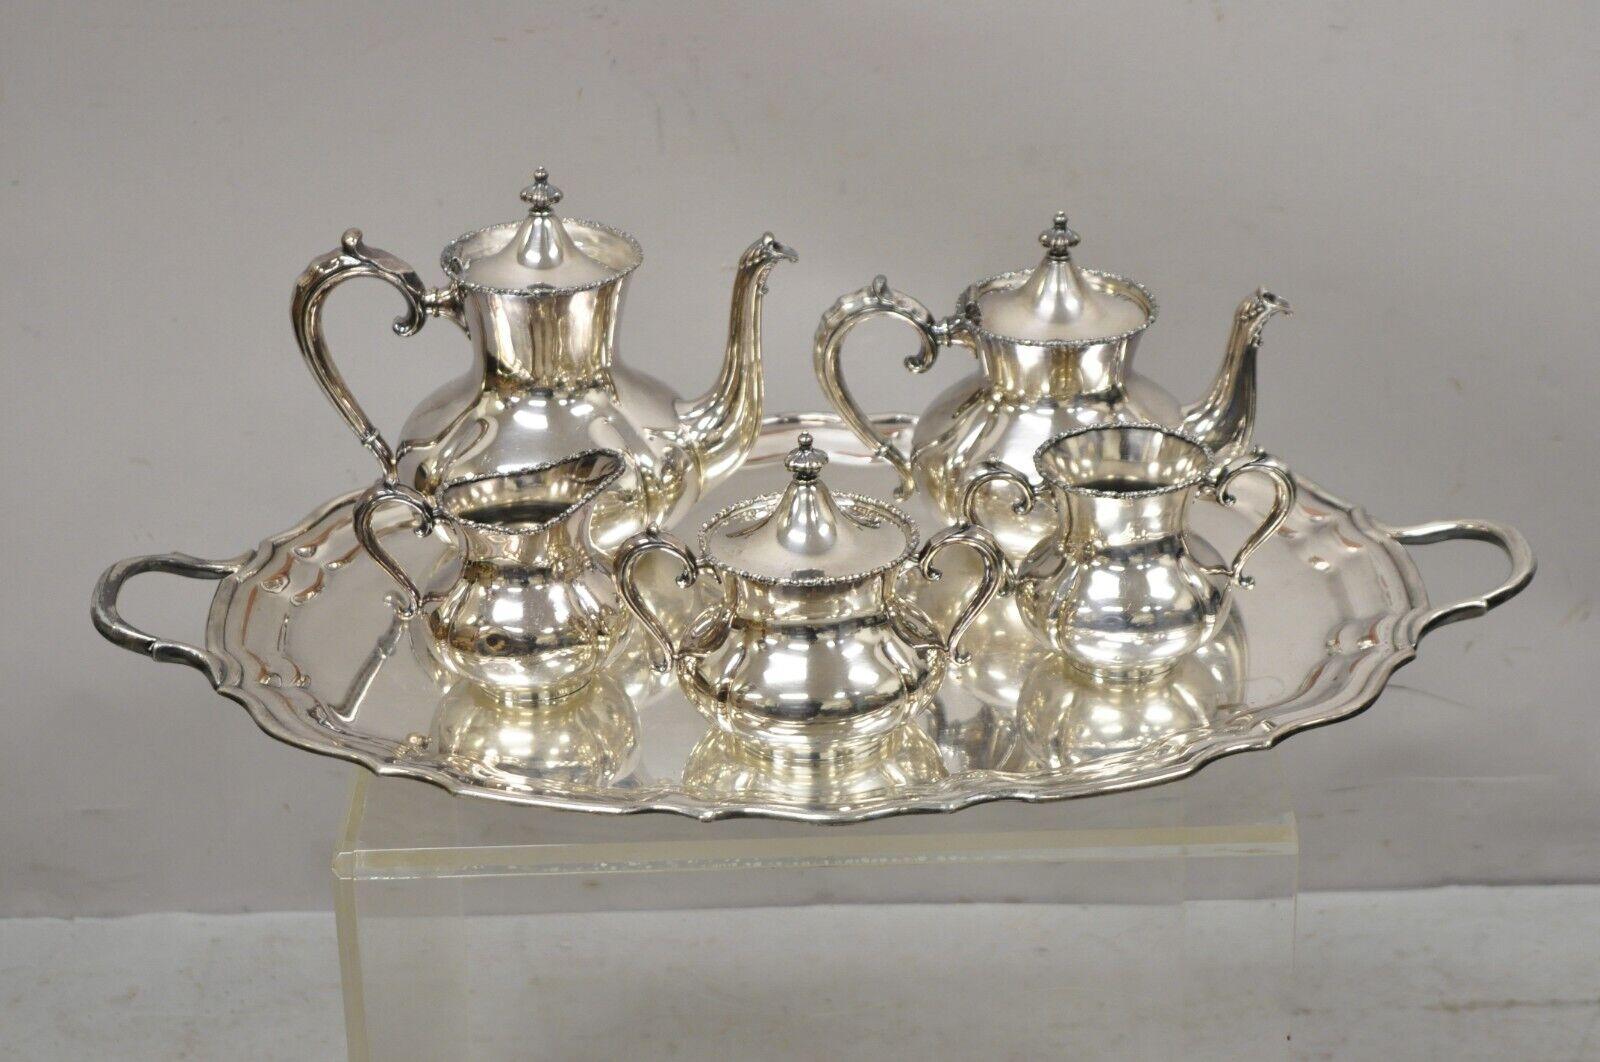 Antique Victorian Silver Plated Tea Set with English Platter Tray, 6 Pc Set 6